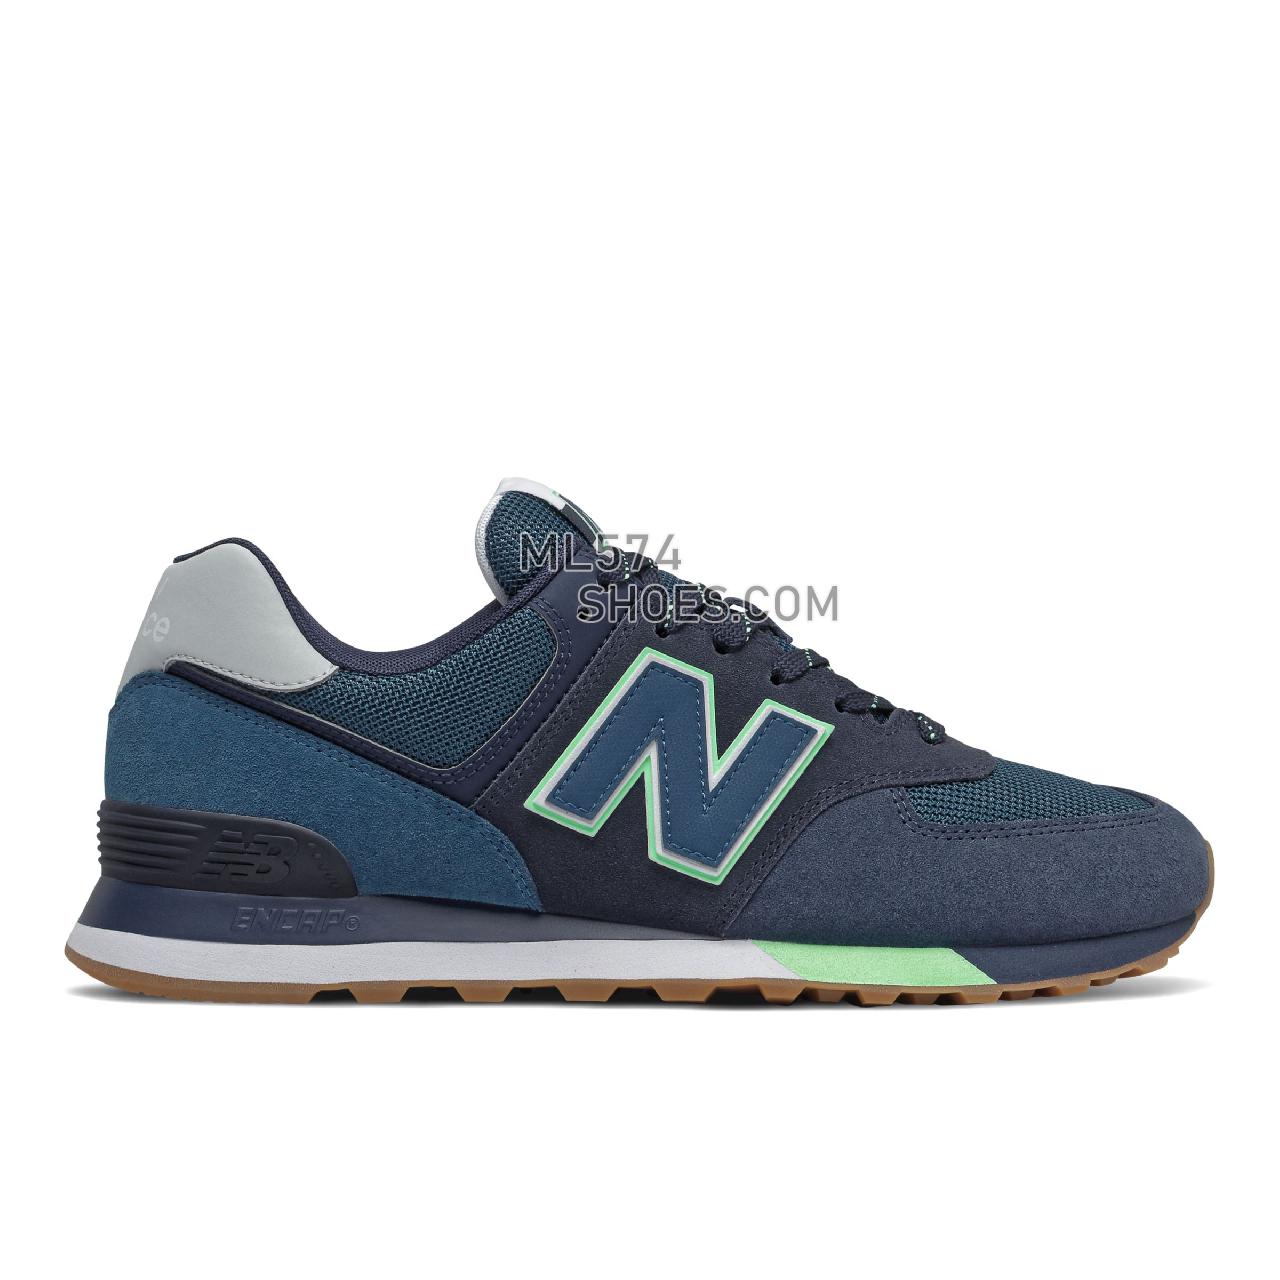 New Balance 574v2 - Men's Classic Sneakers - Natural Indigo with Marblehead - ML574PU2